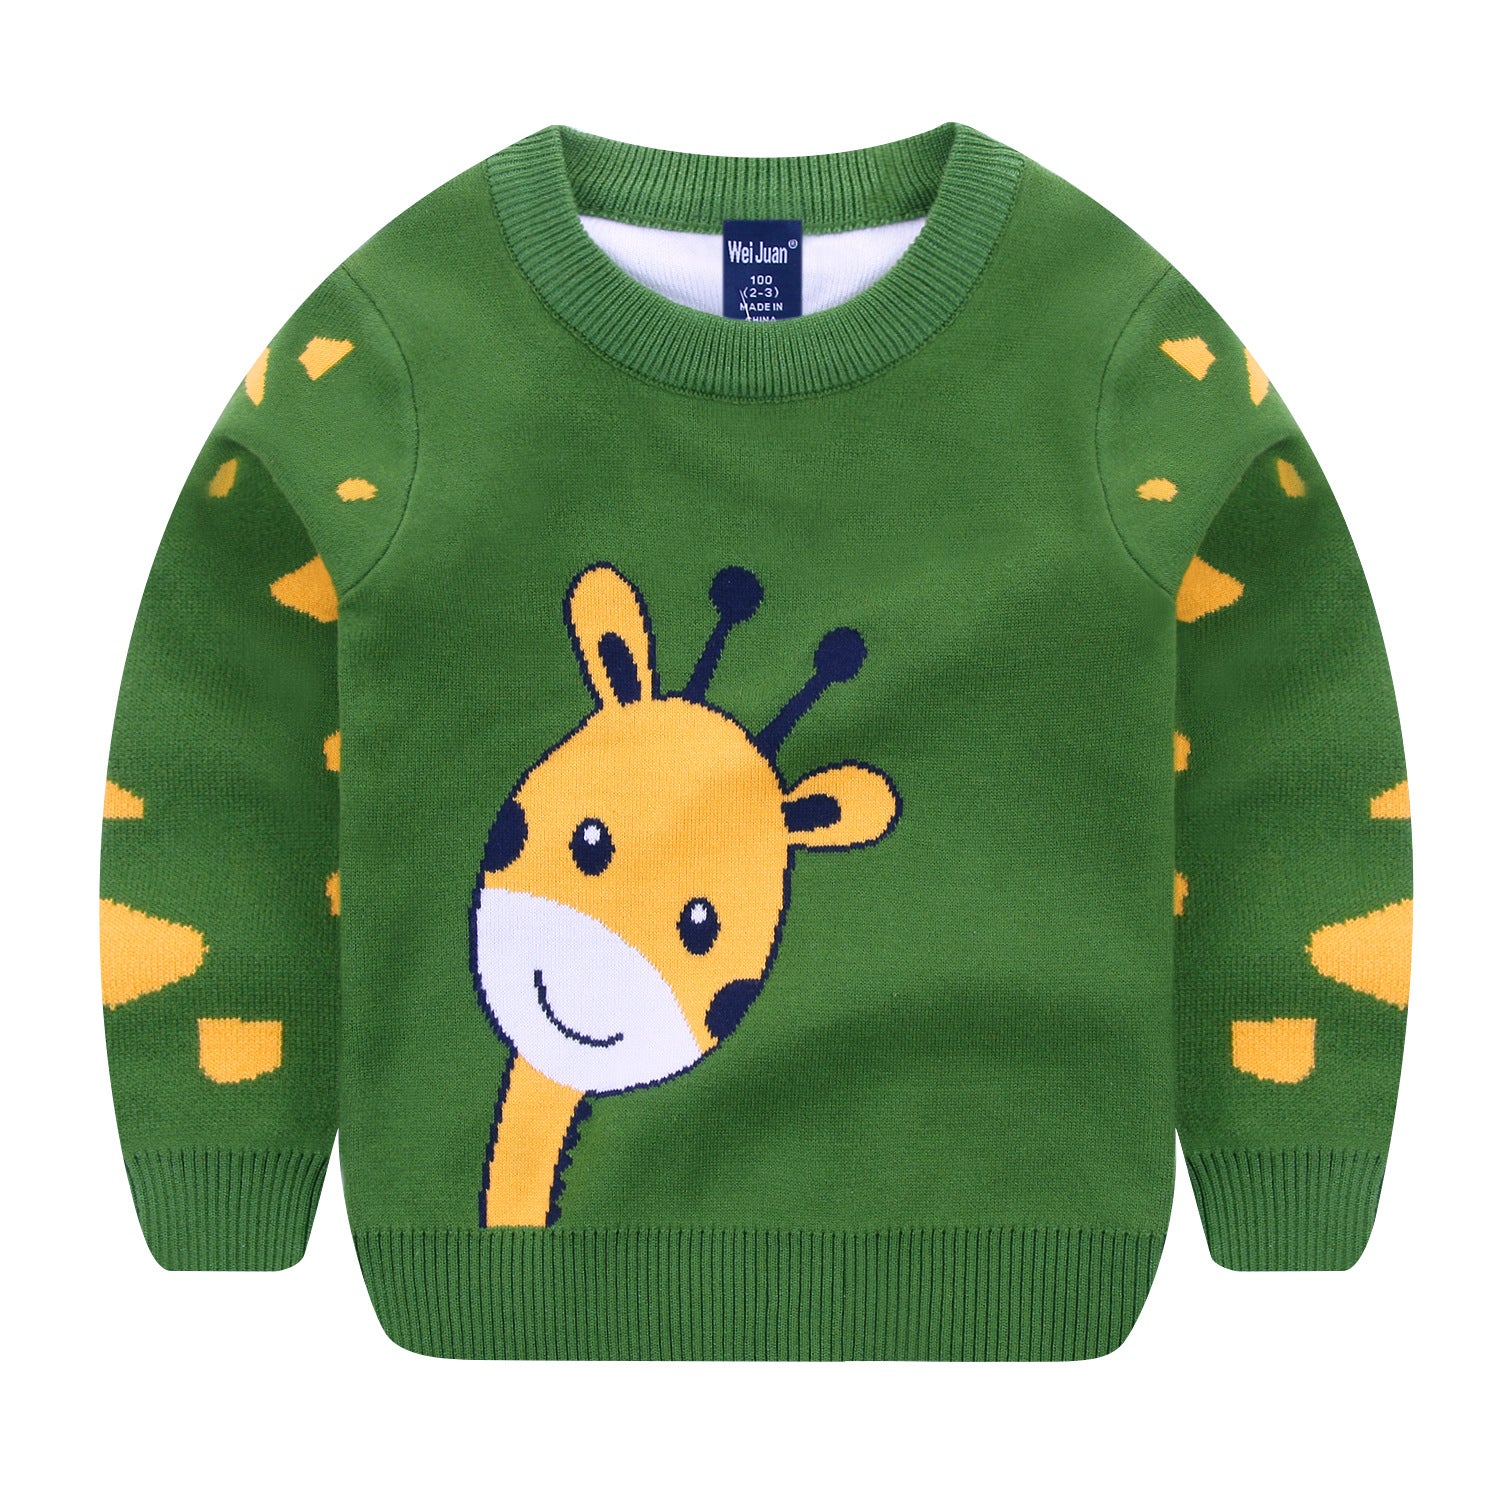 Fawn jacquard sweater for boys and girls